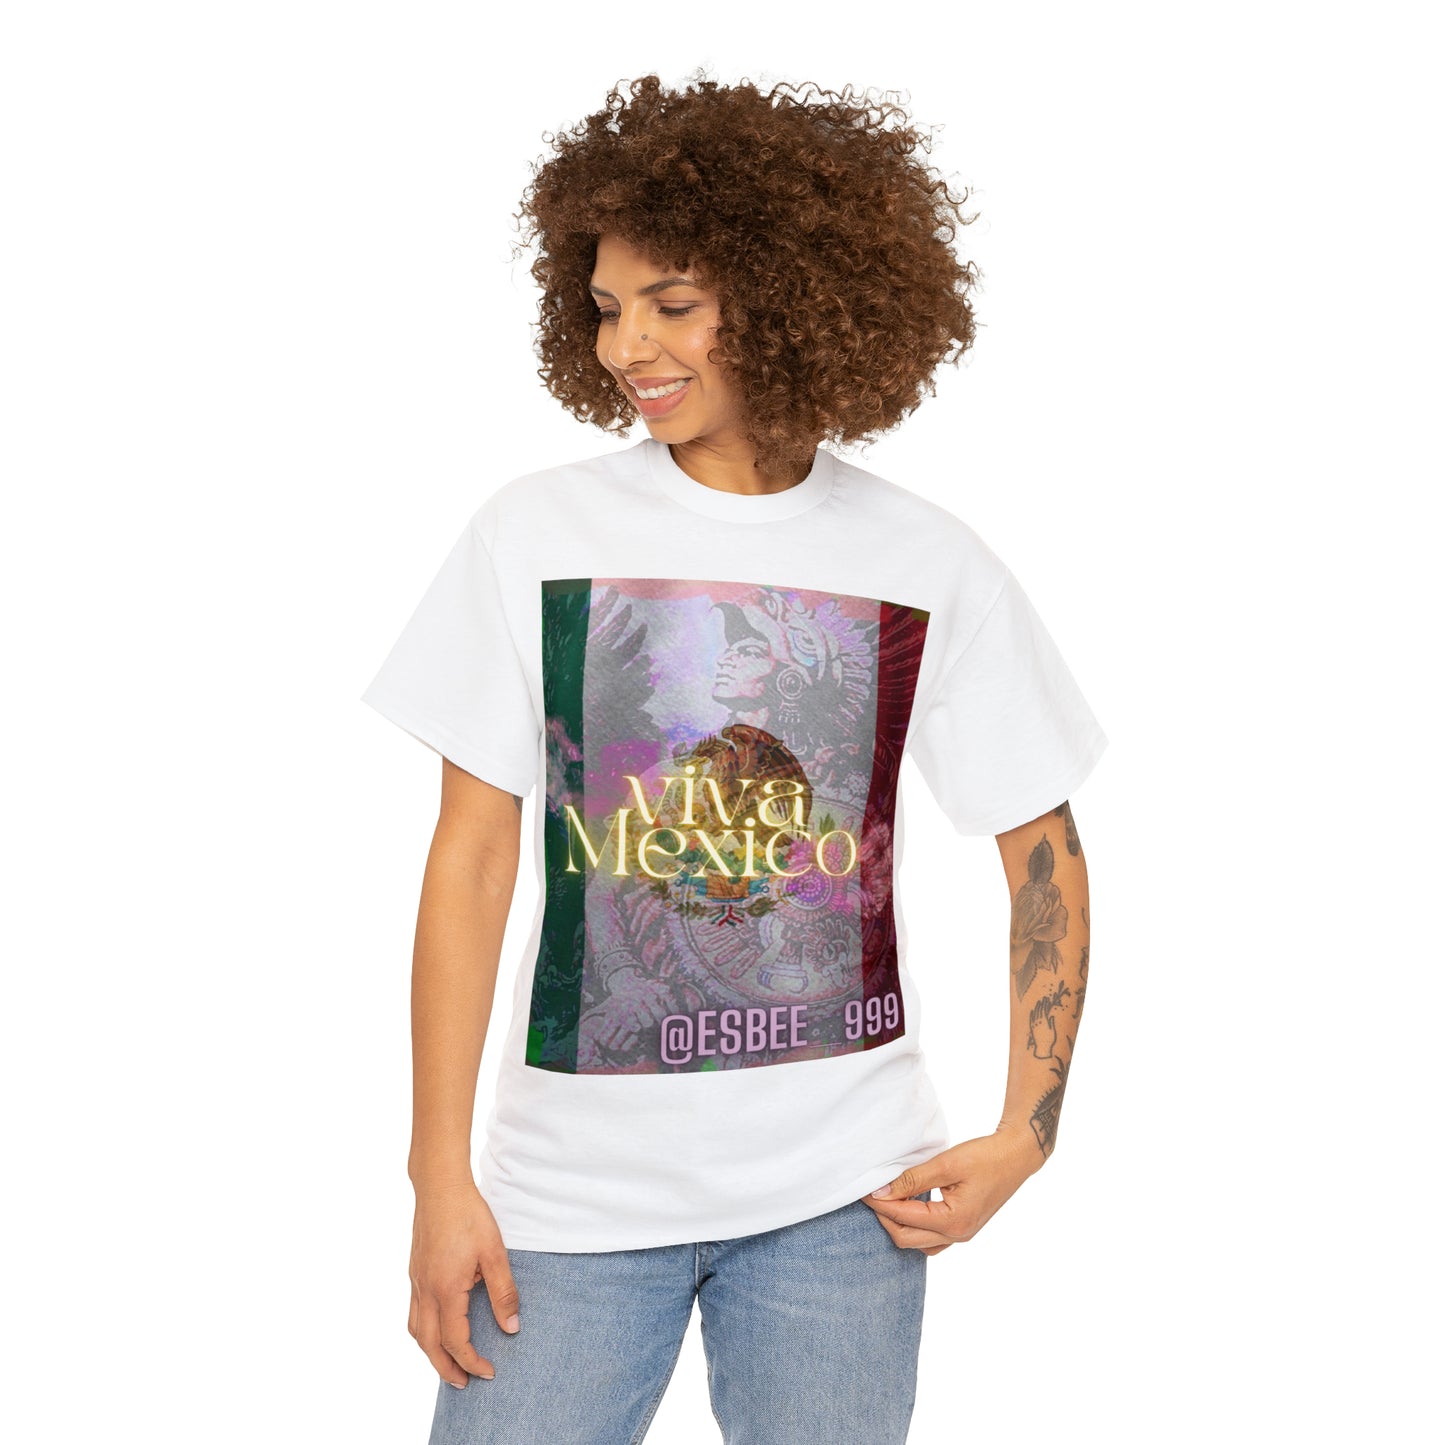 Viva Mexico Mexican Shirt Clothing for Women and Men Heavy Cotton Tee